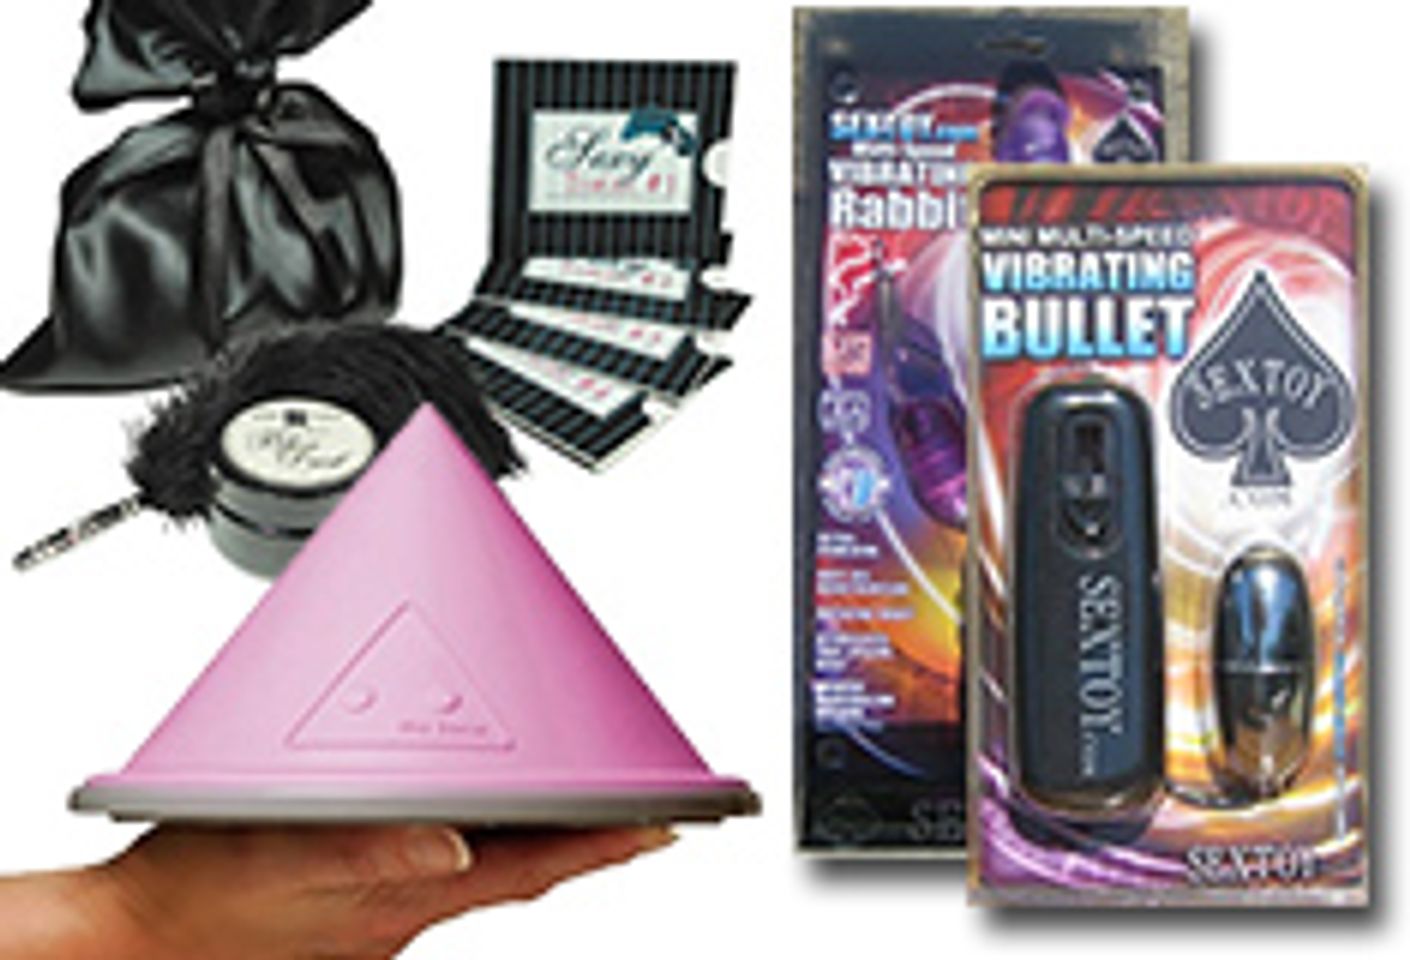 SexToy.com Introduces Its Top Holiday Toys